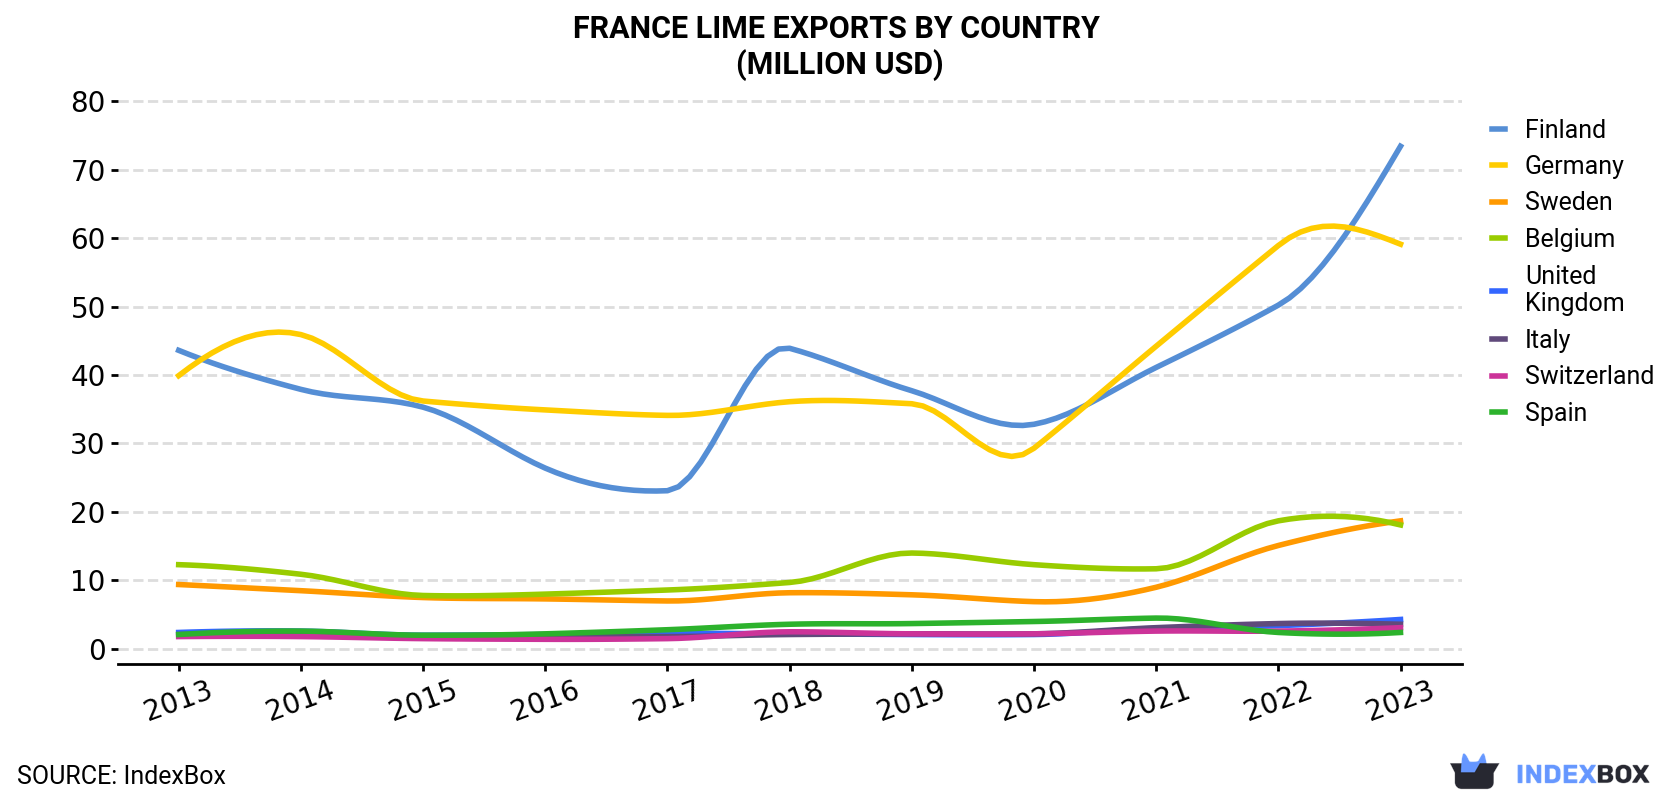 France Lime Exports By Country (Million USD)